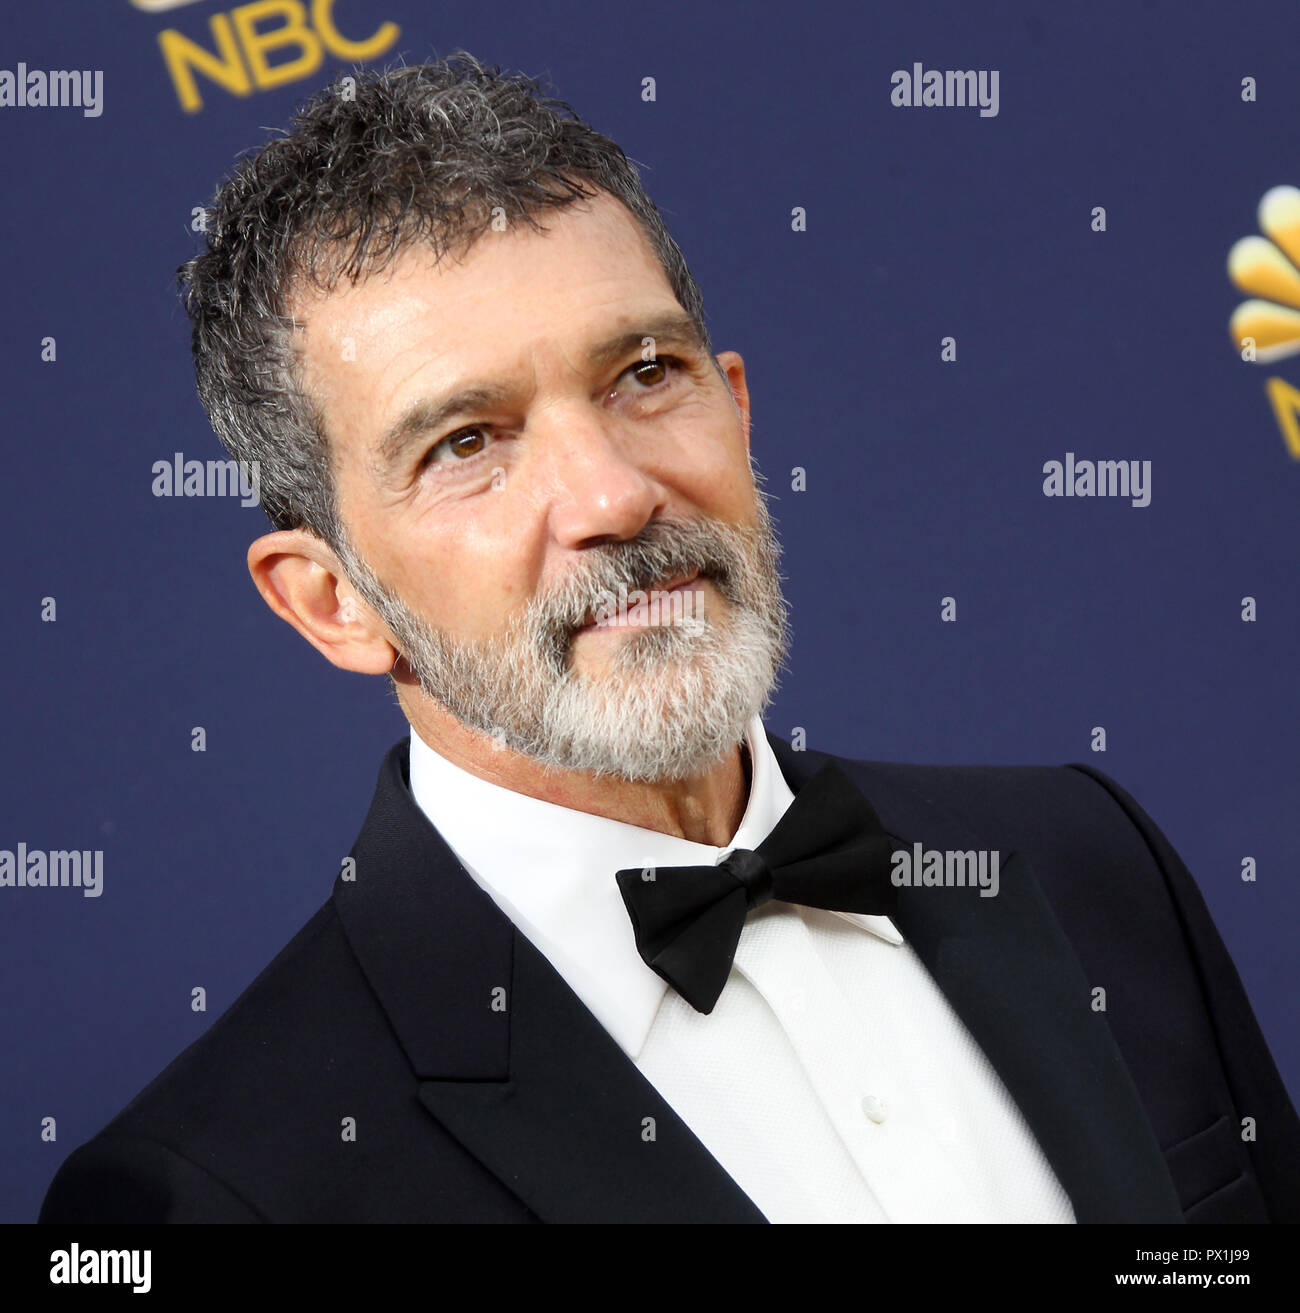 70th Emmy Awards (2018) Arrivals held at the Microsoft Theater in Los Angeles, California.  Featuring: Antonio Banderas Where: Los Angeles, California, United States When: 17 Sep 2018 Credit: Adriana M. Barraza/WENN.com Stock Photo